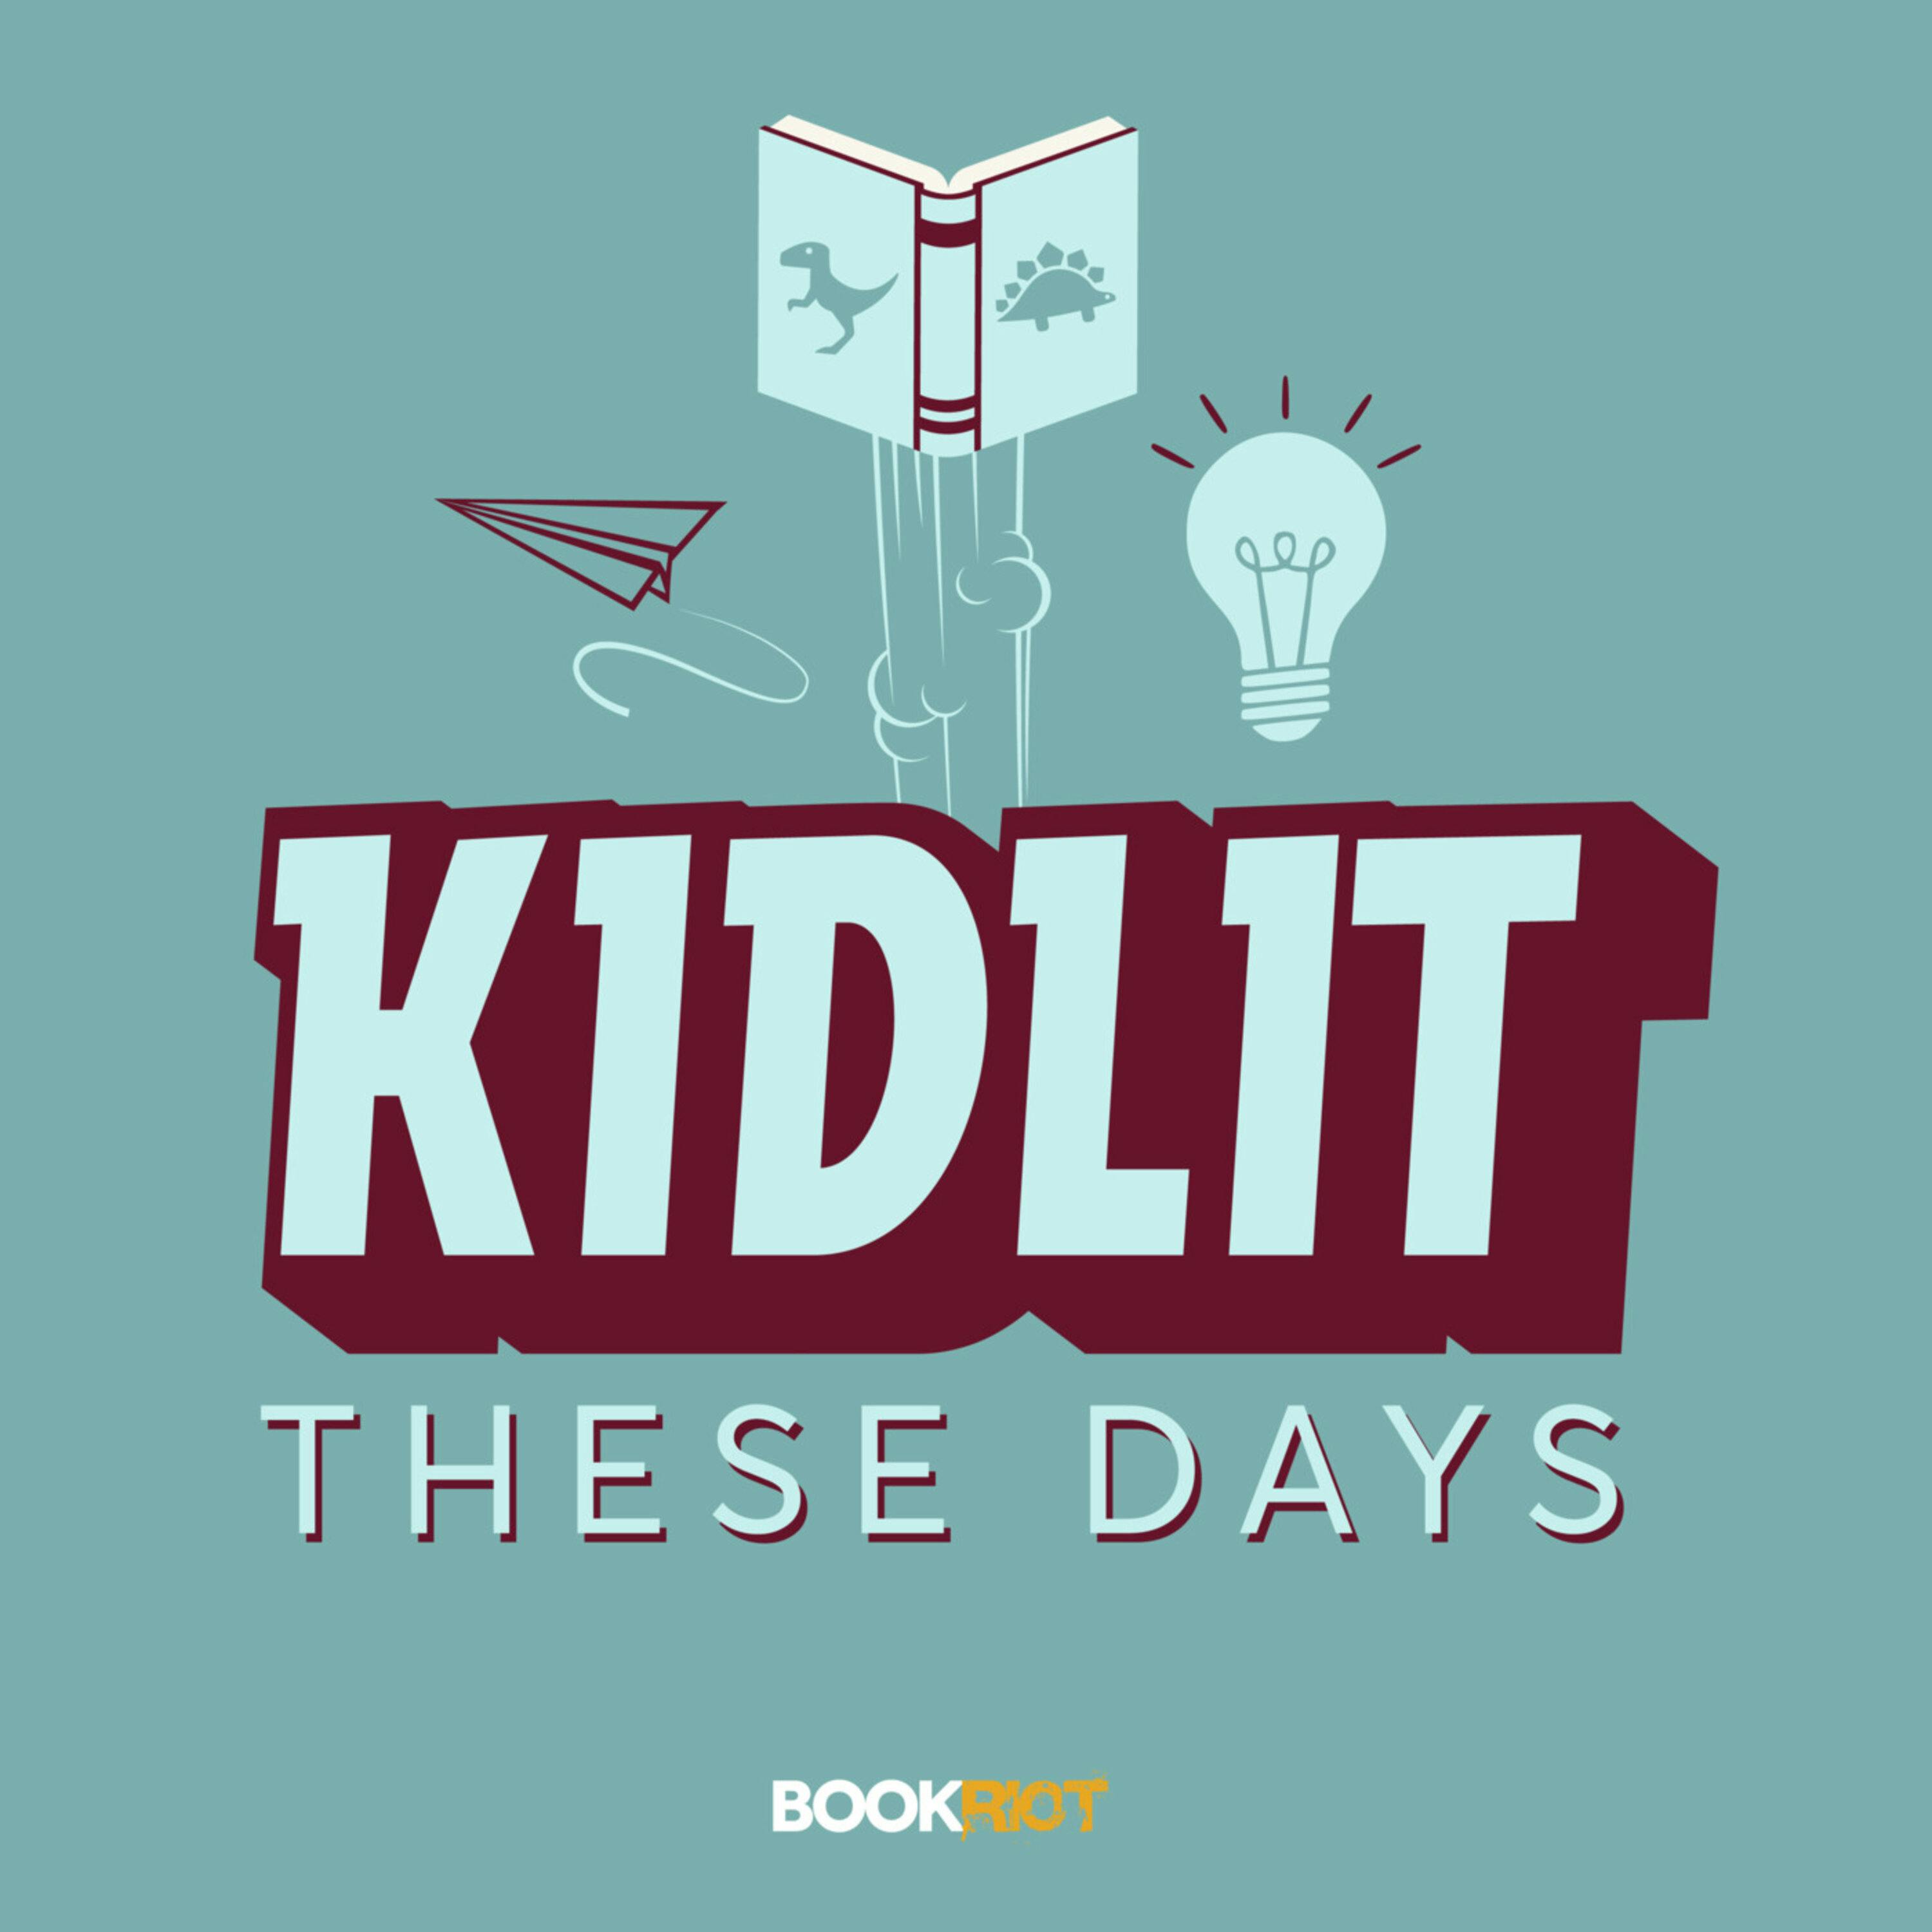 Introducing Kidlit These Days!